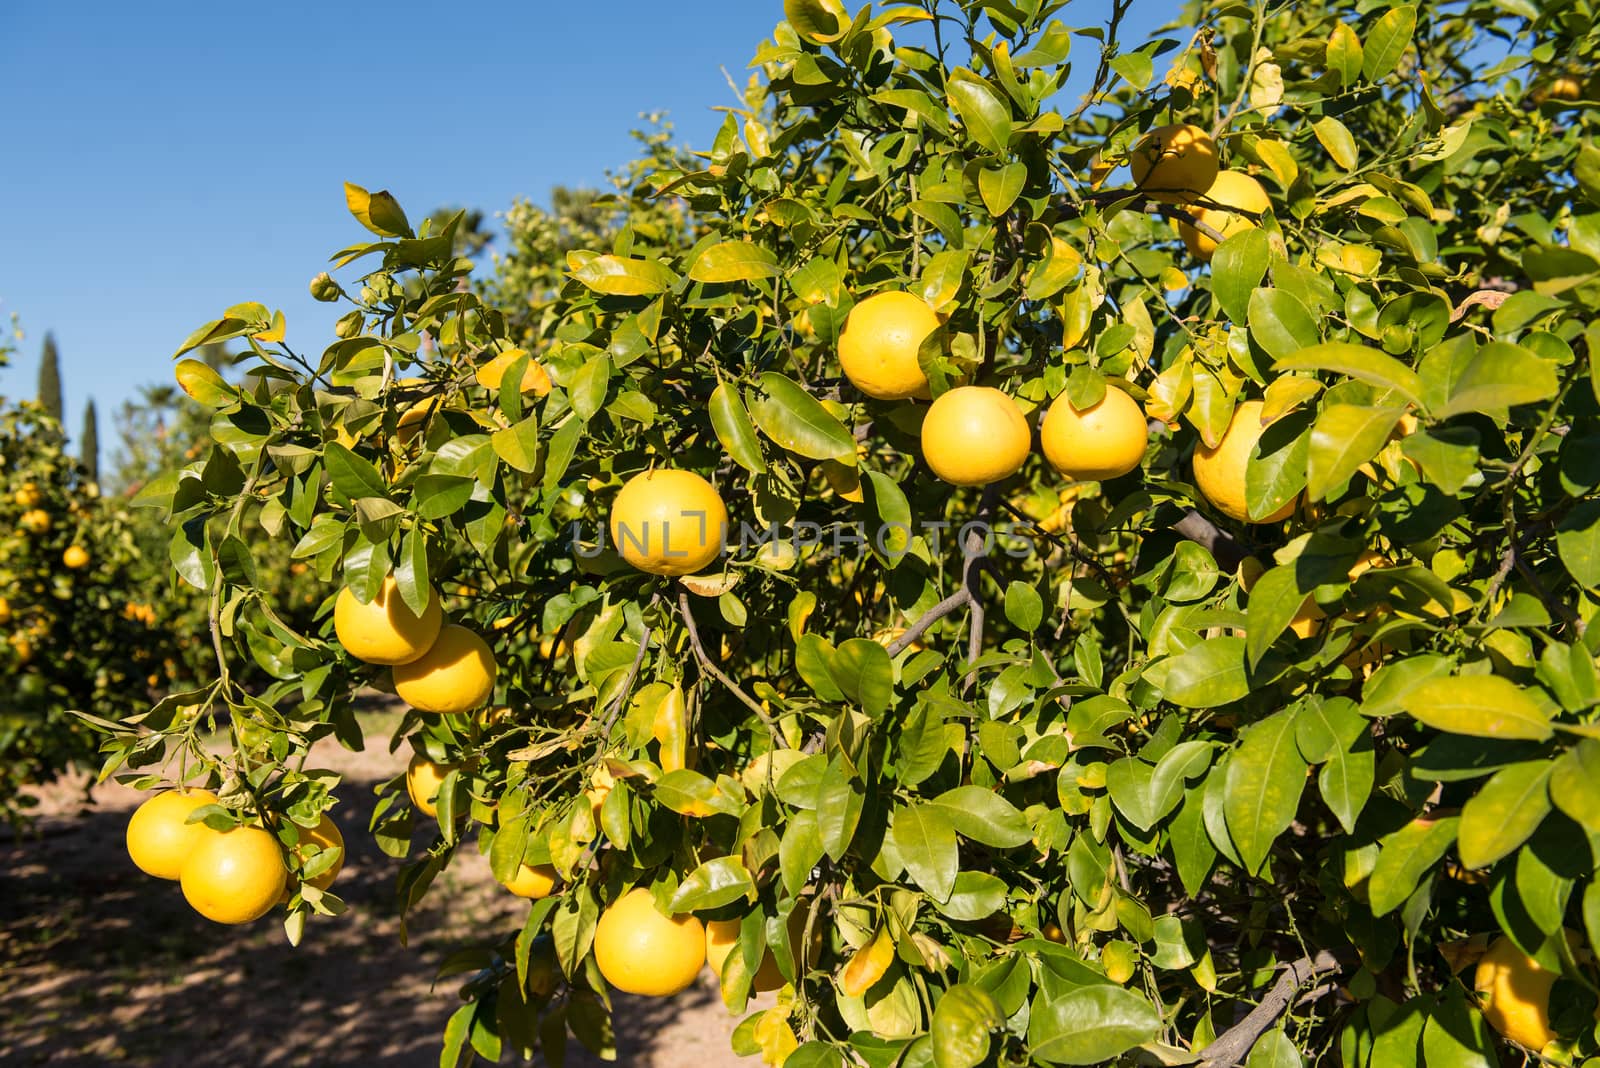 Grapefruit tree with clusters of grapefruits ready to be harvested.